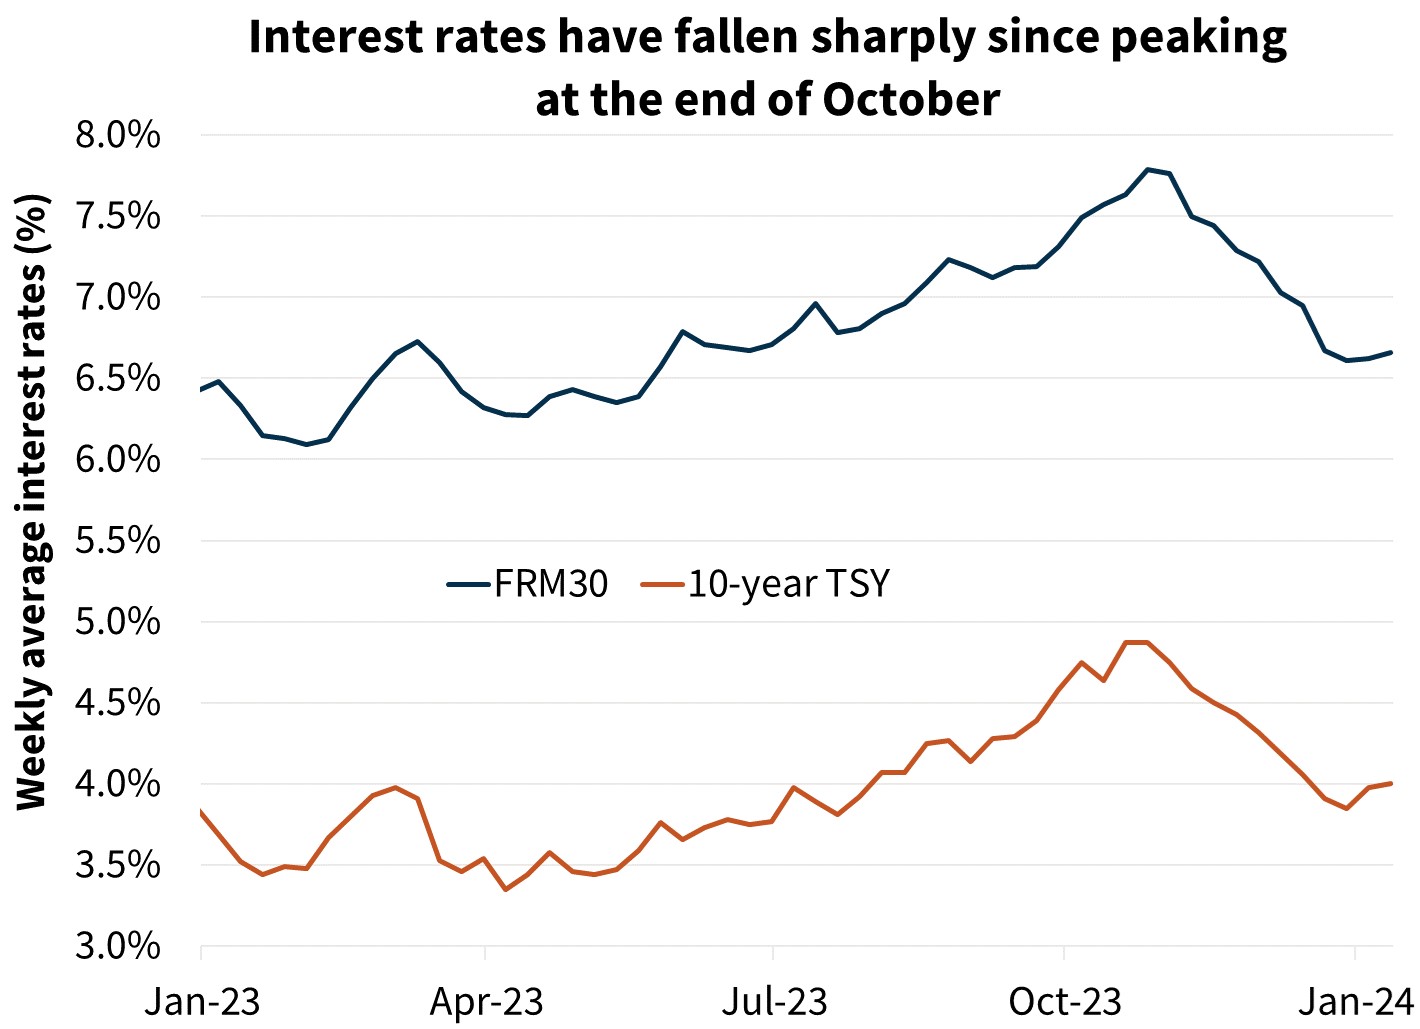 Interest rates have fallen sharply since peaking at the end of October